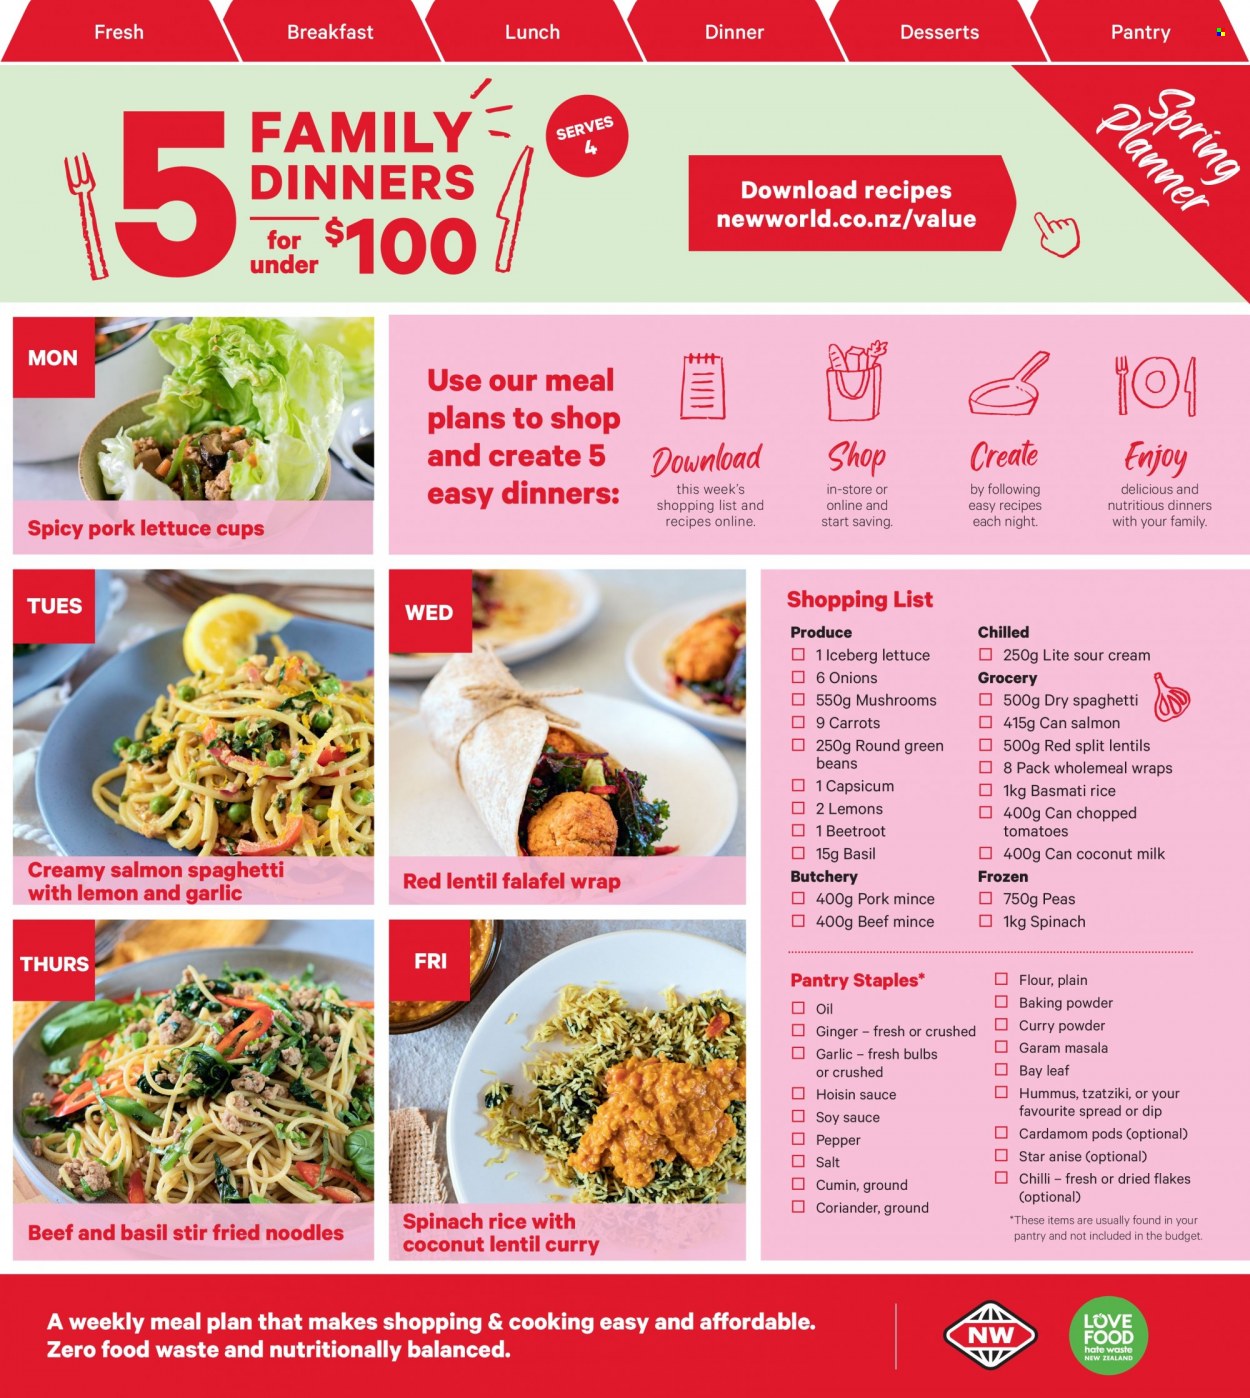 thumbnail - New World mailer - 28.11.2022 - 04.12.2022 - Sales products - mushrooms, wraps, beans, carrots, garlic, ginger, green beans, spinach, tomatoes, peas, onion, lettuce, capsicum, beetroot, lemons, salmon, spaghetti, sauce, noodles, tzatziki, hummus, sour cream, dip, baking powder, flour, salt, coconut milk, lentils, chopped tomatoes, basmati rice, rice, red lentils, pepper, curry powder, cumin, coriander, soy sauce, hoisin sauce, oil, beef meat, ground pork, pork meat, Rin, cup, bulb. Page 11.